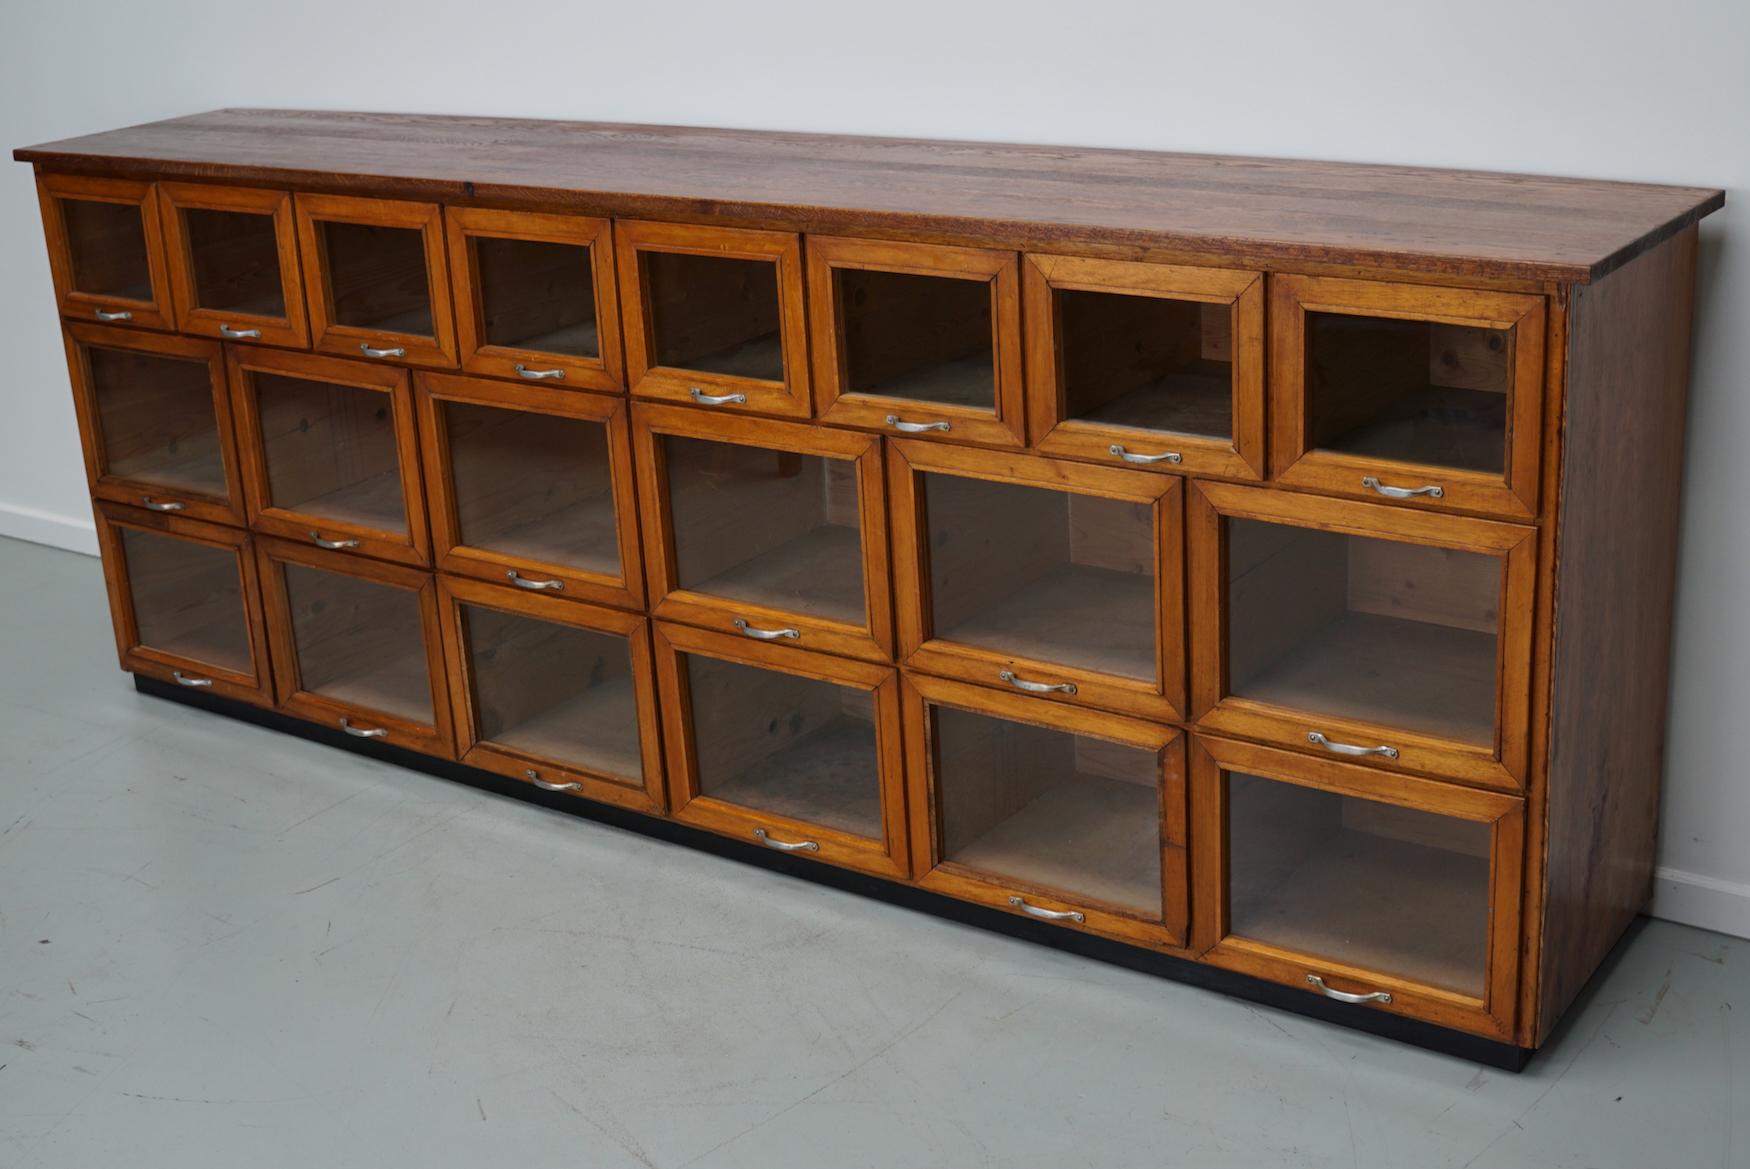 This haberdashery cabinet was produced during the 1950s in the Netherlands. It features 20 large drawers in oak with glass fronts and metal handles. It was originally used in a warehouse for plant seeds in the city of Delft. The interior dimensions